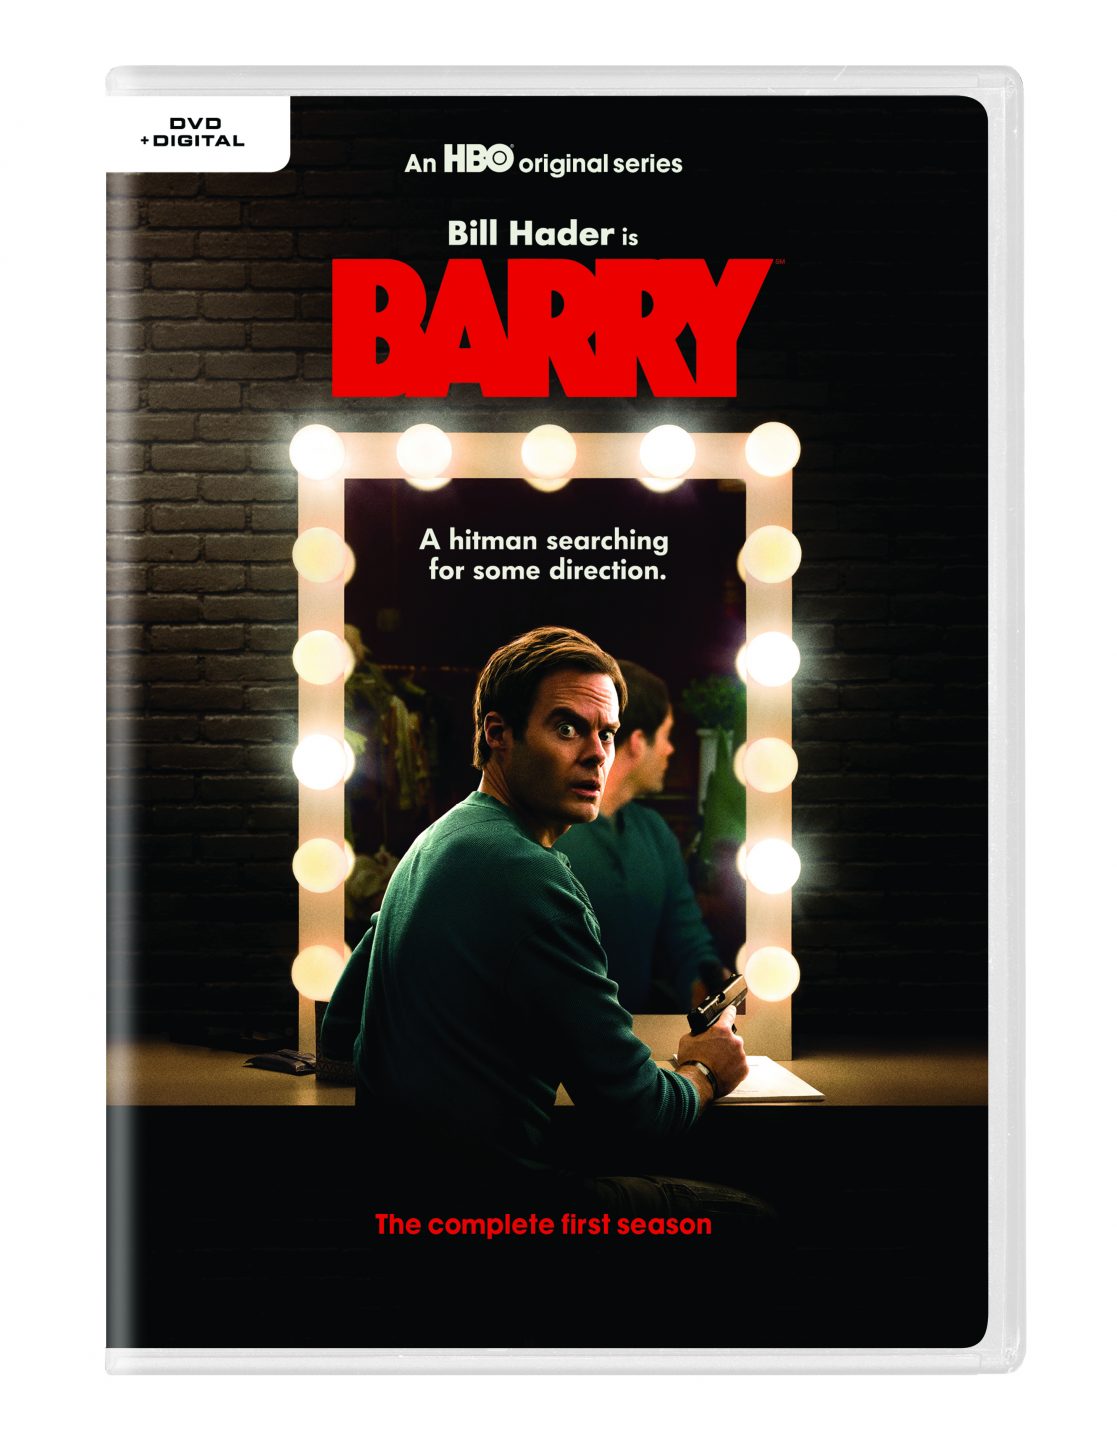 Barry; The Complete First Season DVD cover (HBO)